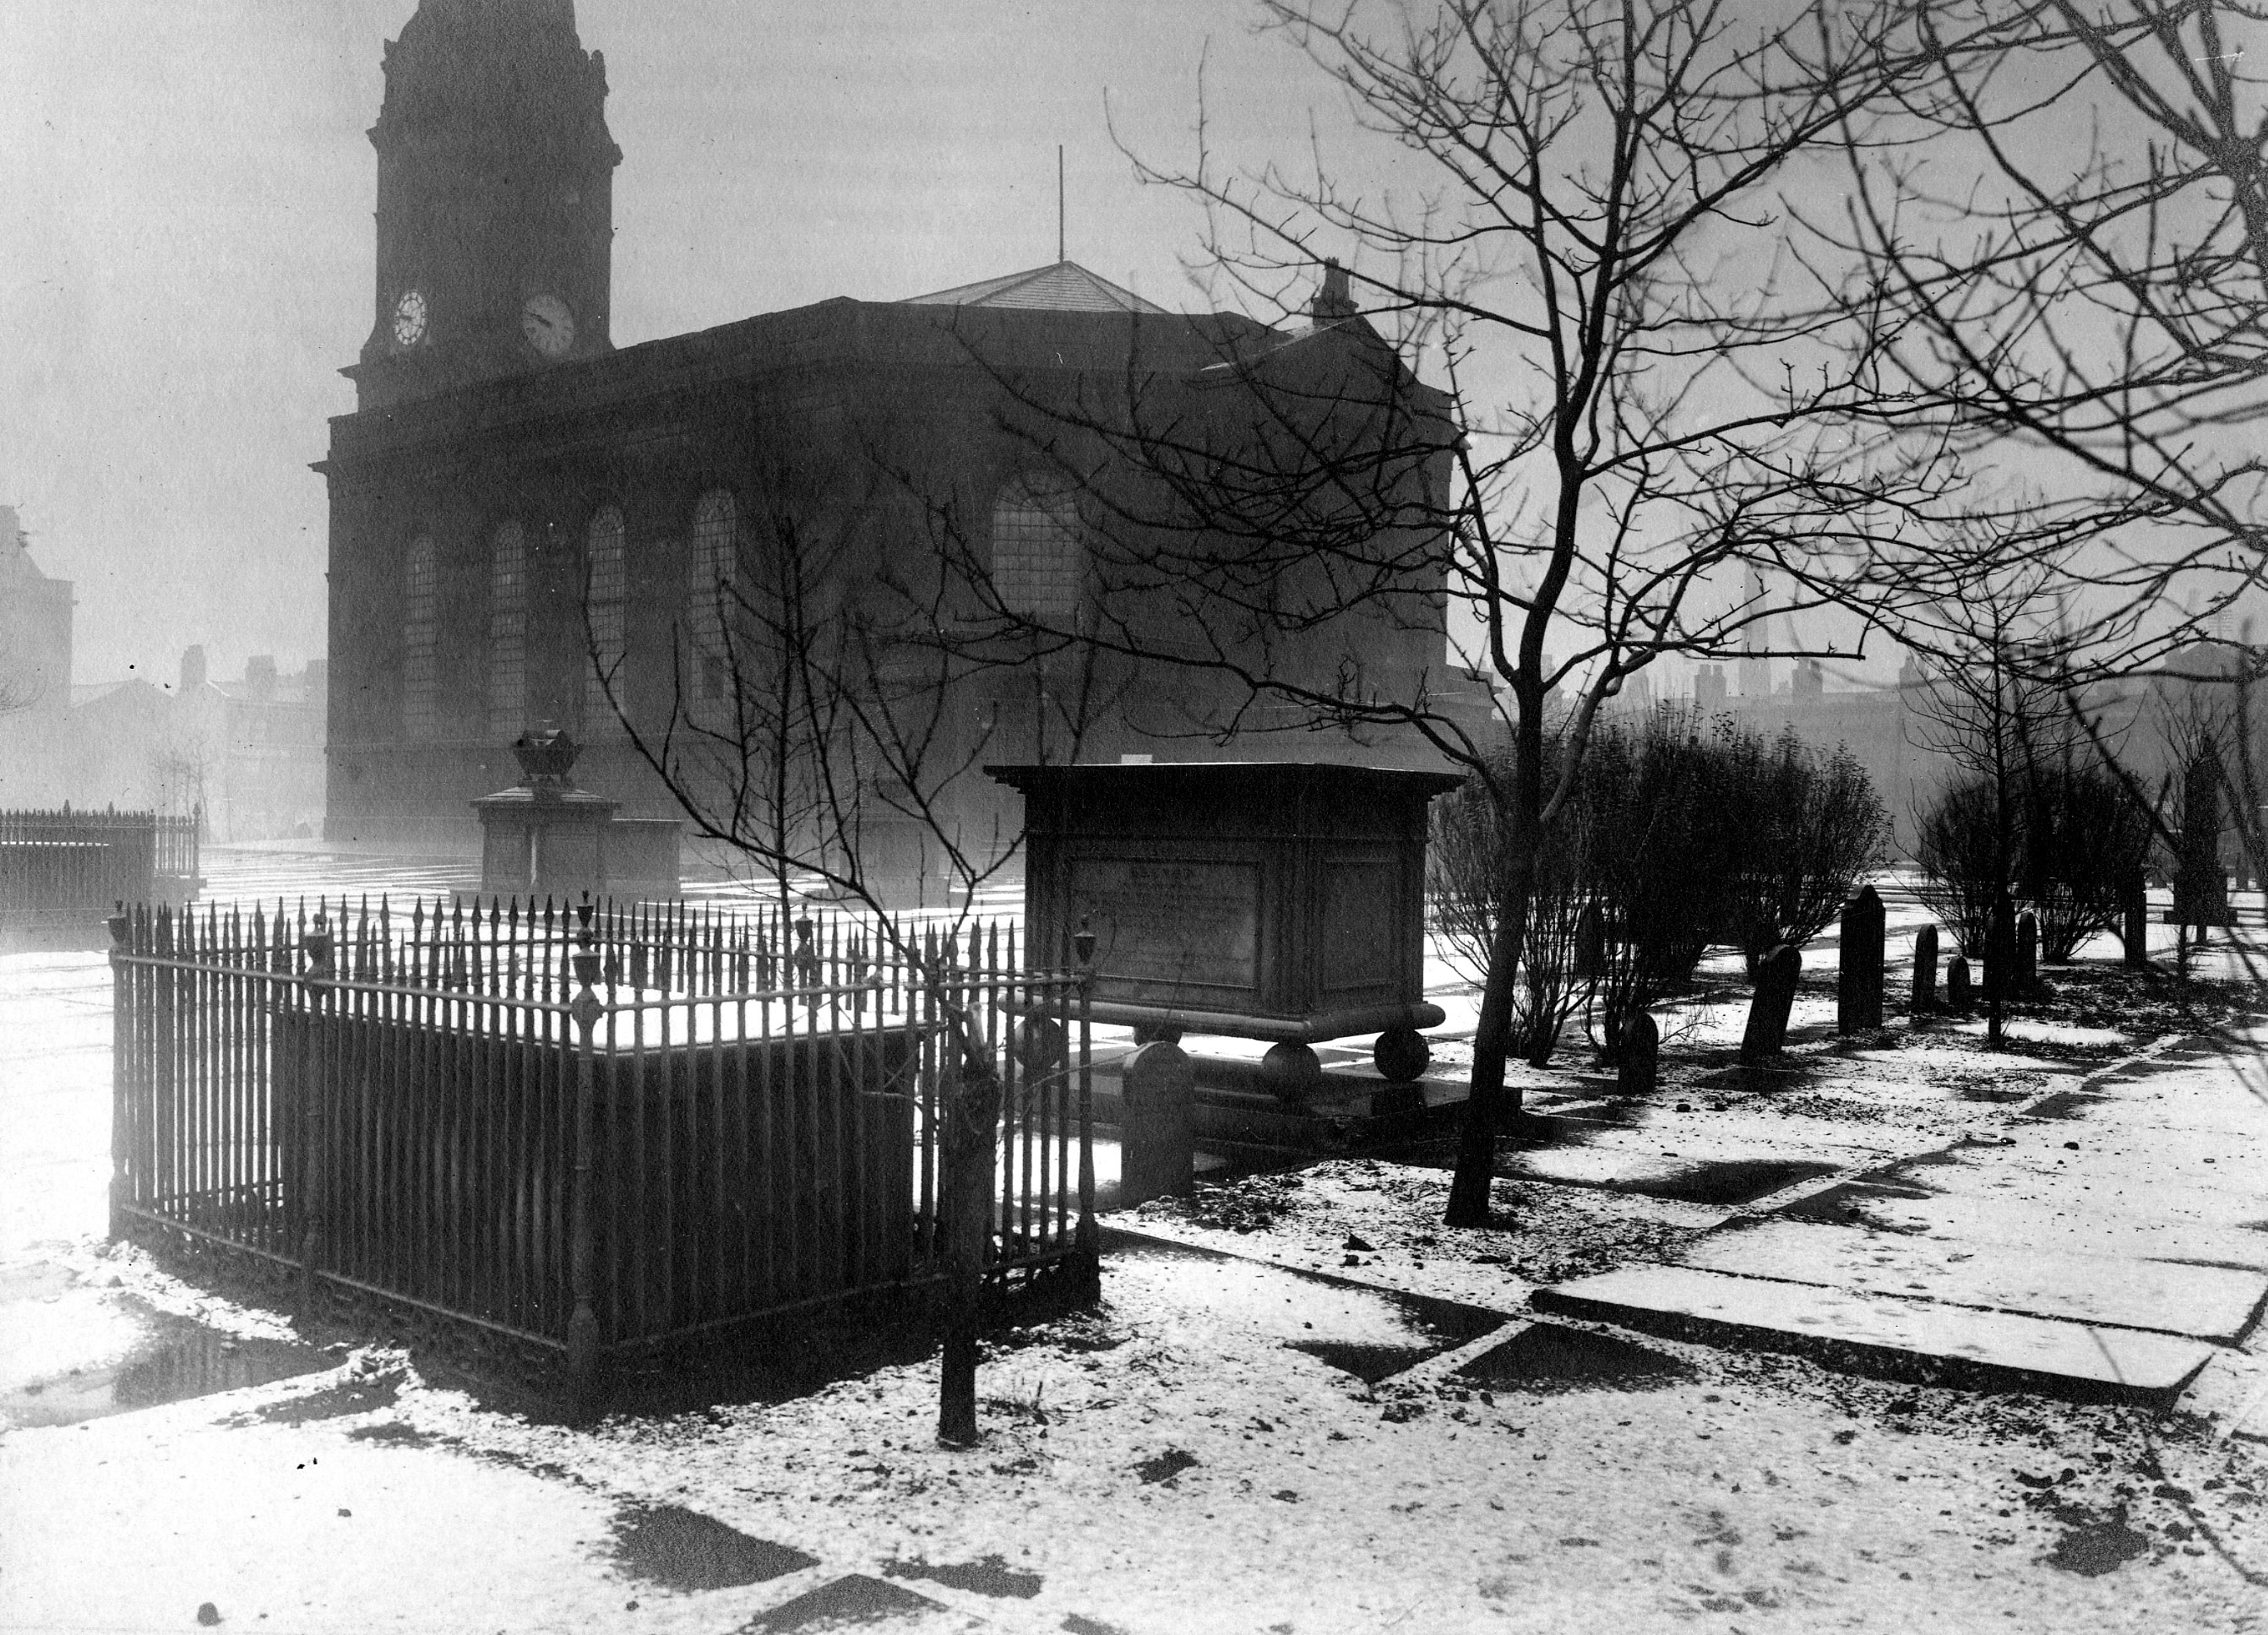 All Saints Church 1910 (Image courtesy of Manchester Libraries and Archives)